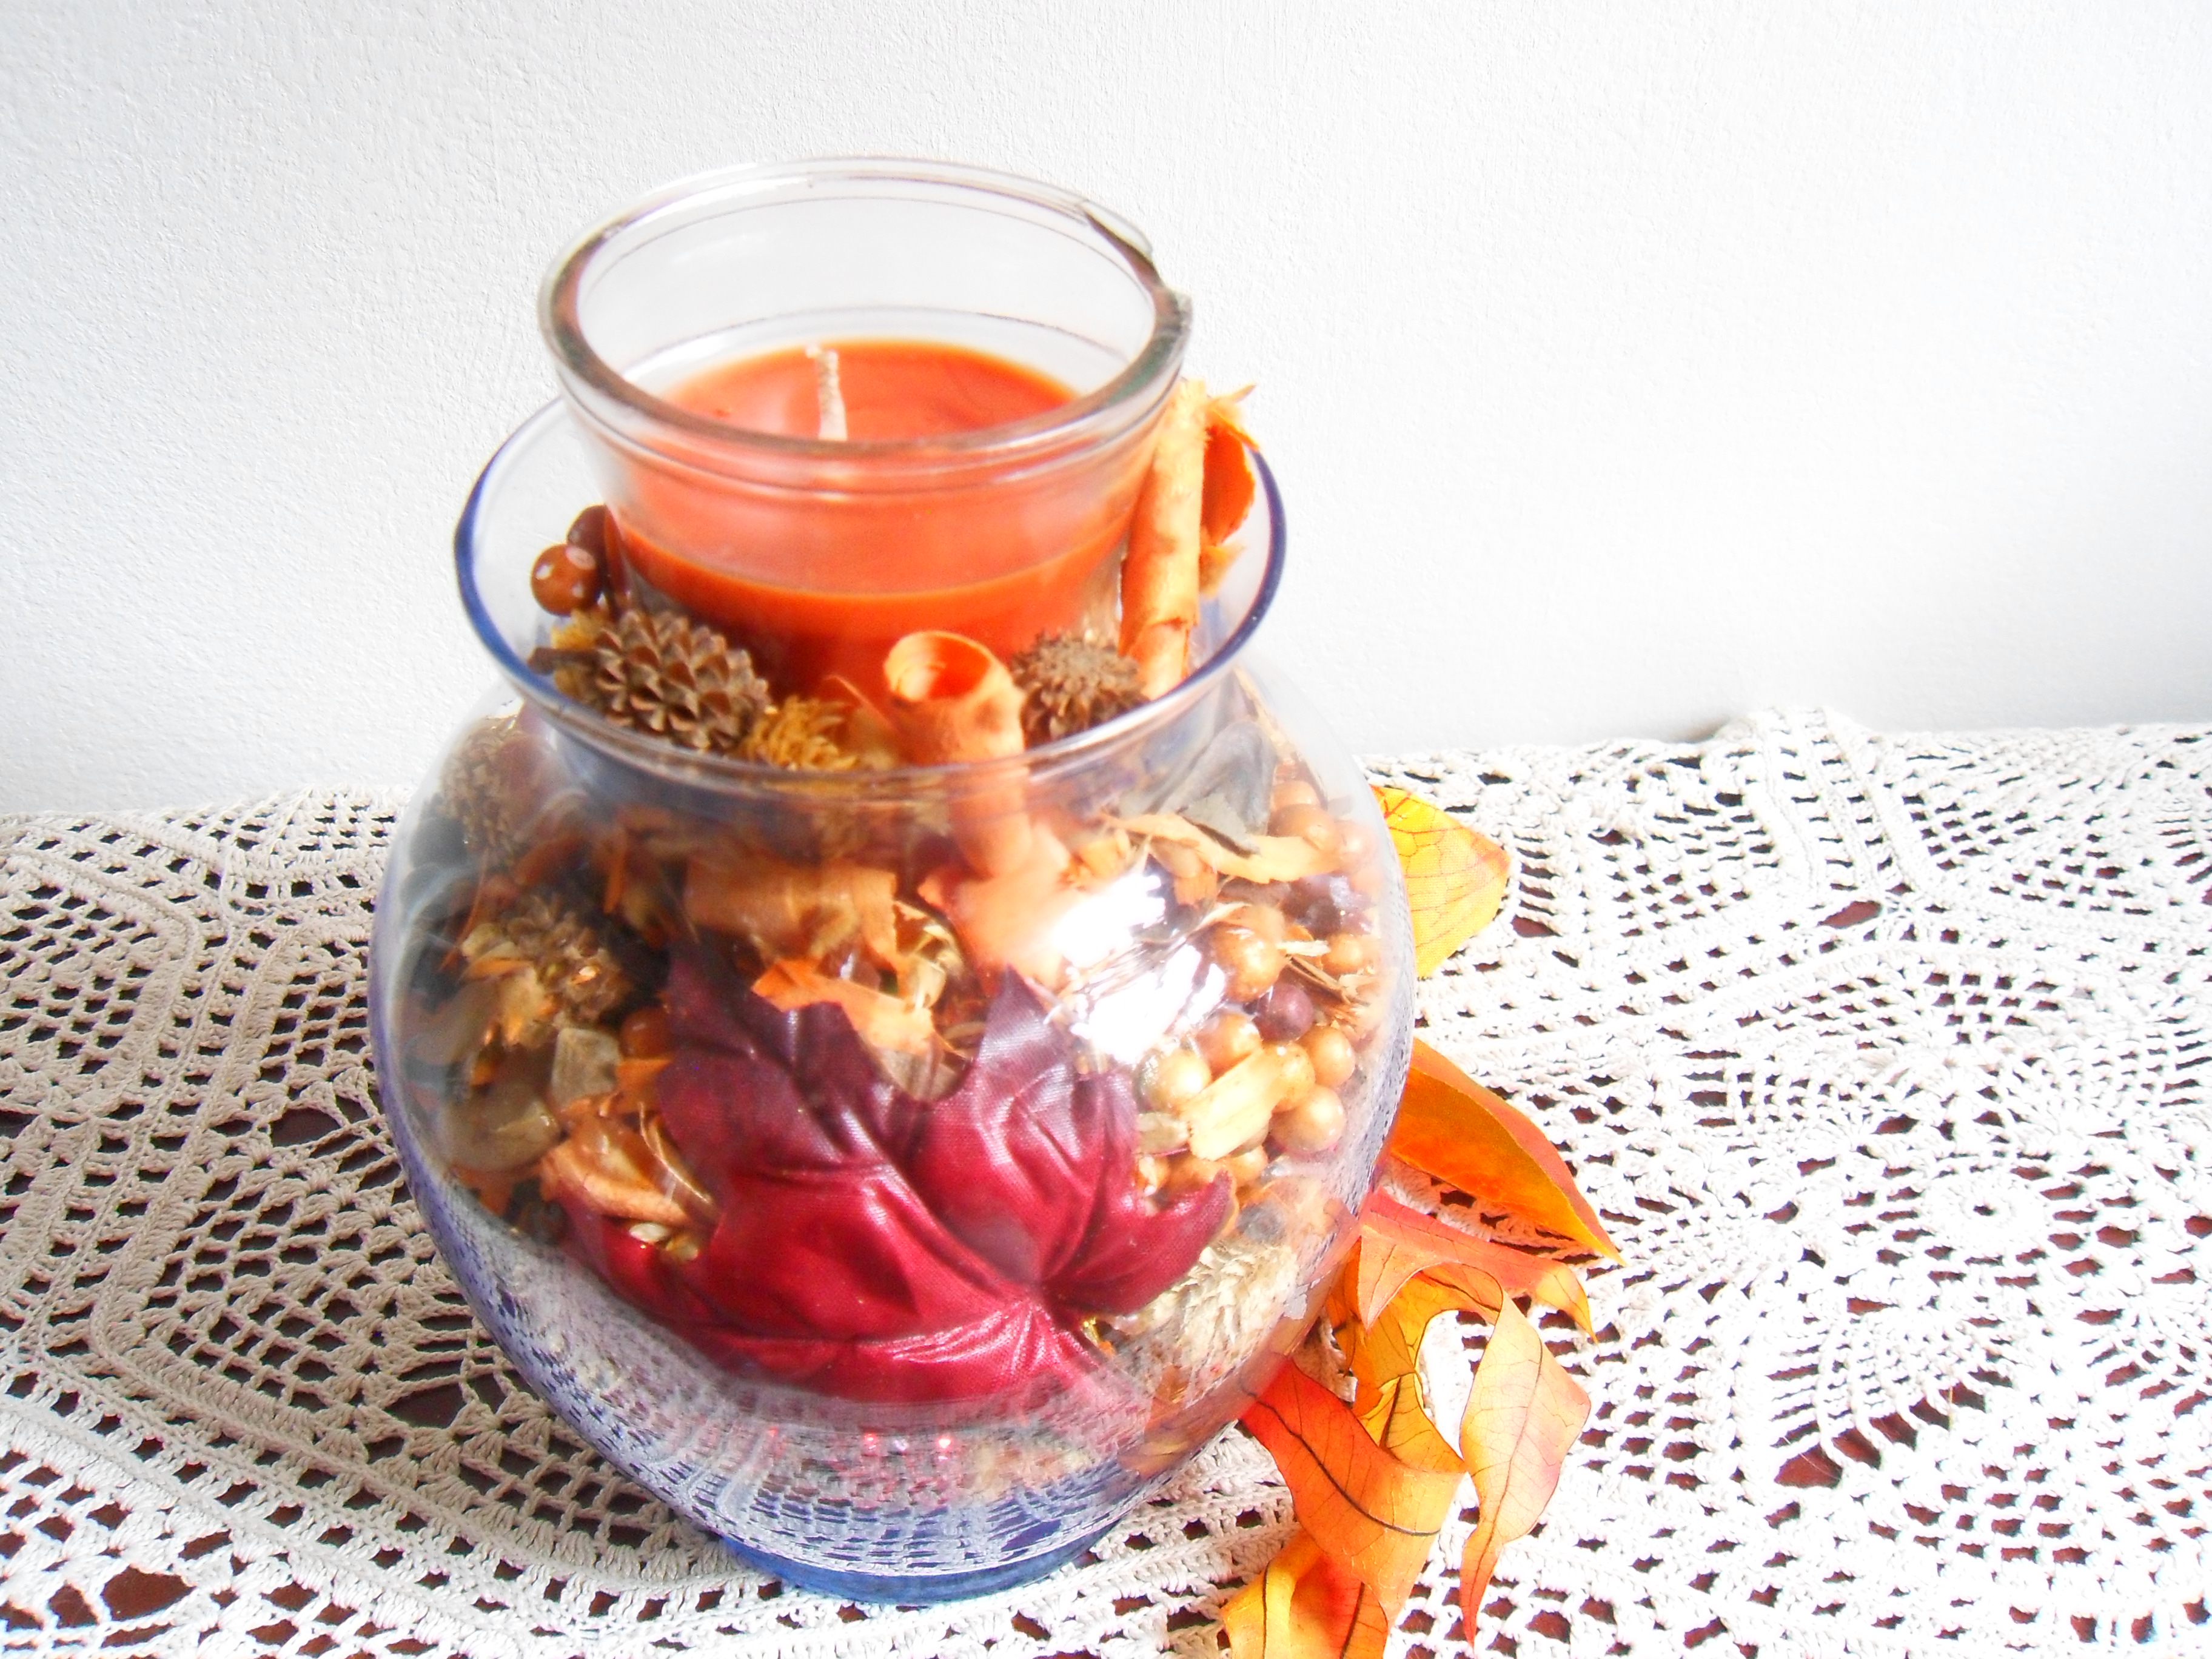 Autumn Votive Craft - adapt for any season or holiday